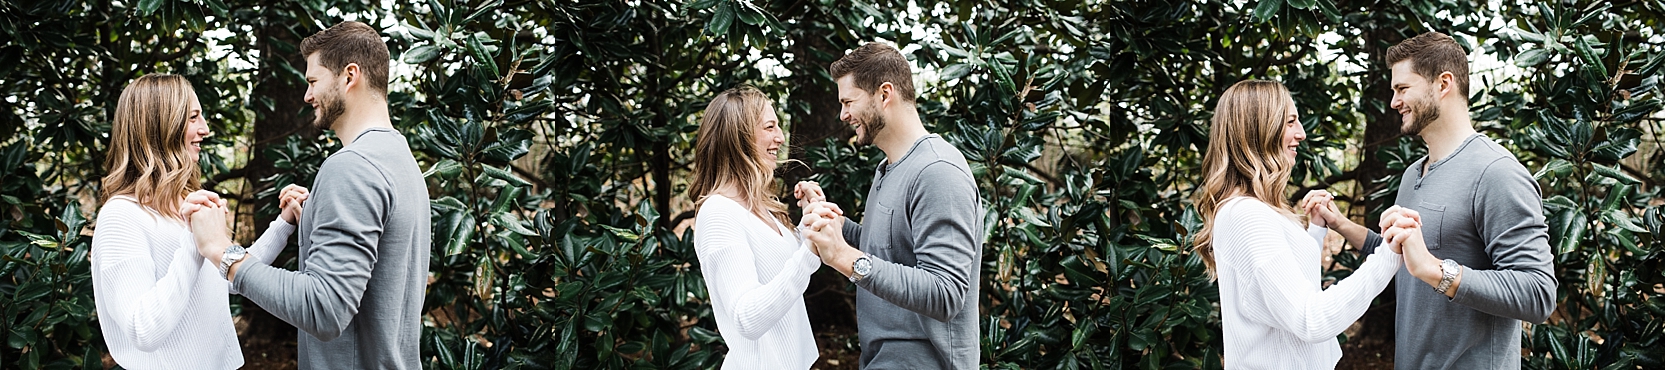 Spring Engagement Session at the Dallas Arboretum_Lindsey Ramdin_L.A.R. Weddings